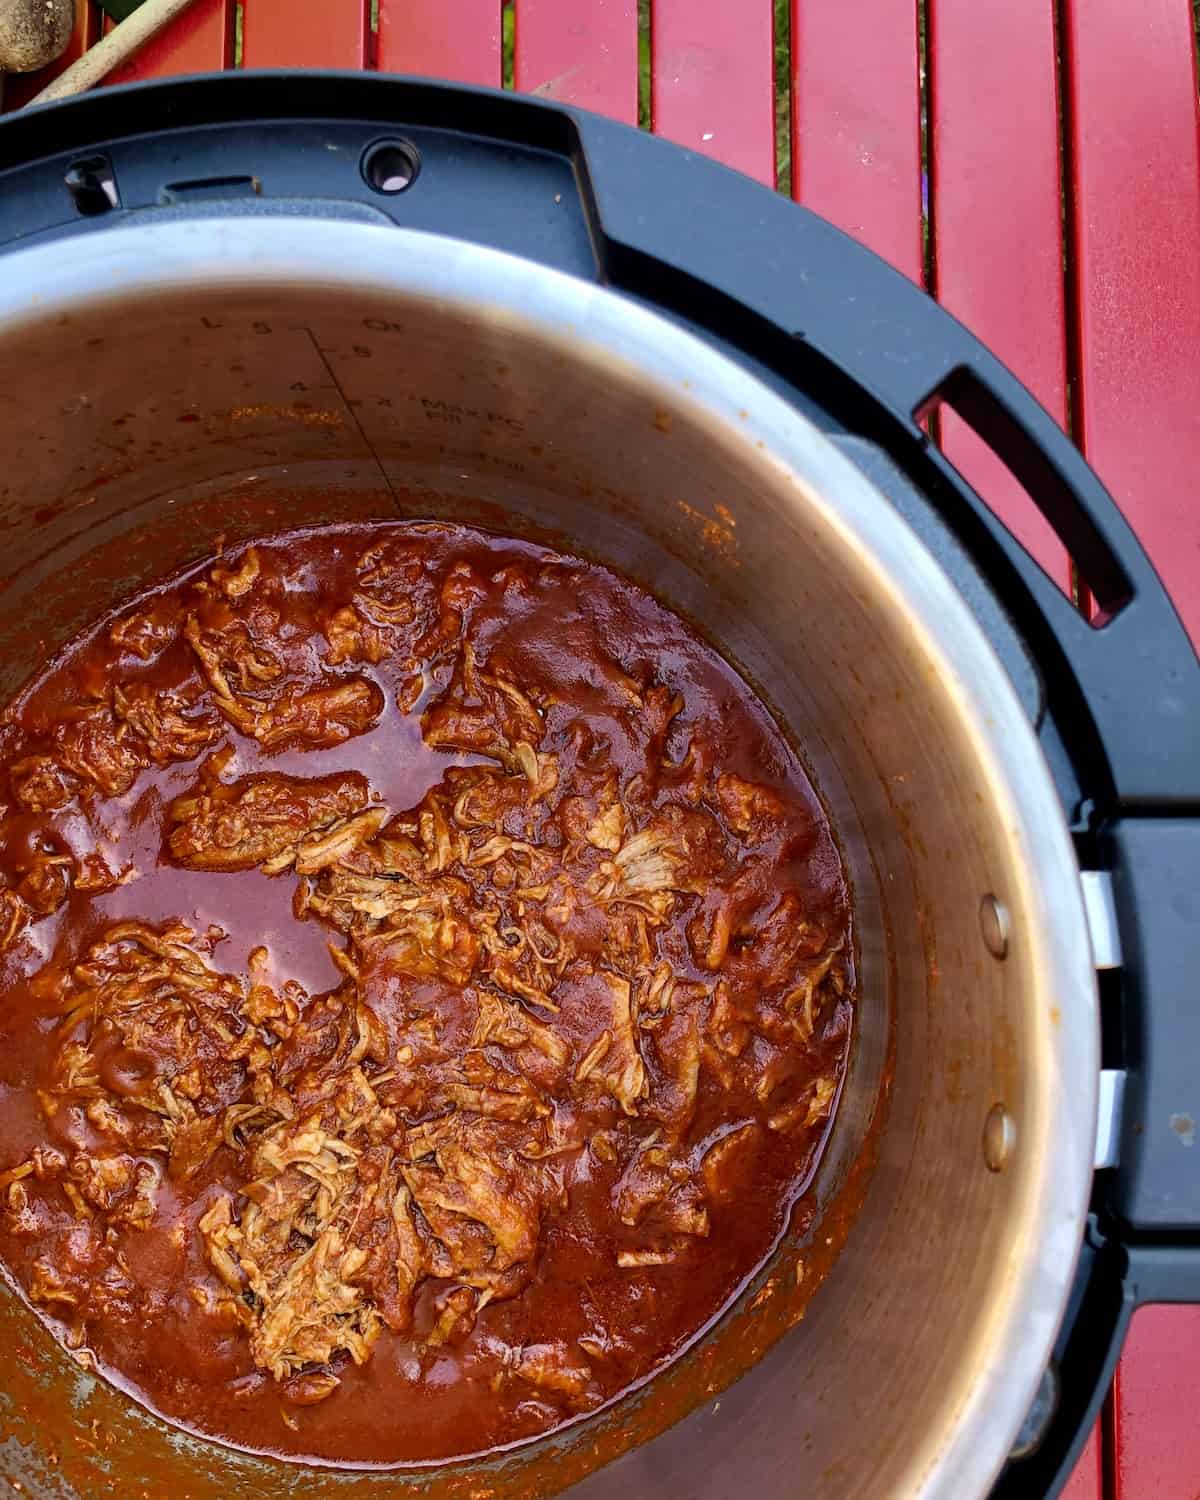 Photo of Cooked Easy Instant Pot BBQ Pulled Pork recipe by Feisty Tapas, seen from above inside the Instant Pot Duo Evo Plus against a red slatted surface